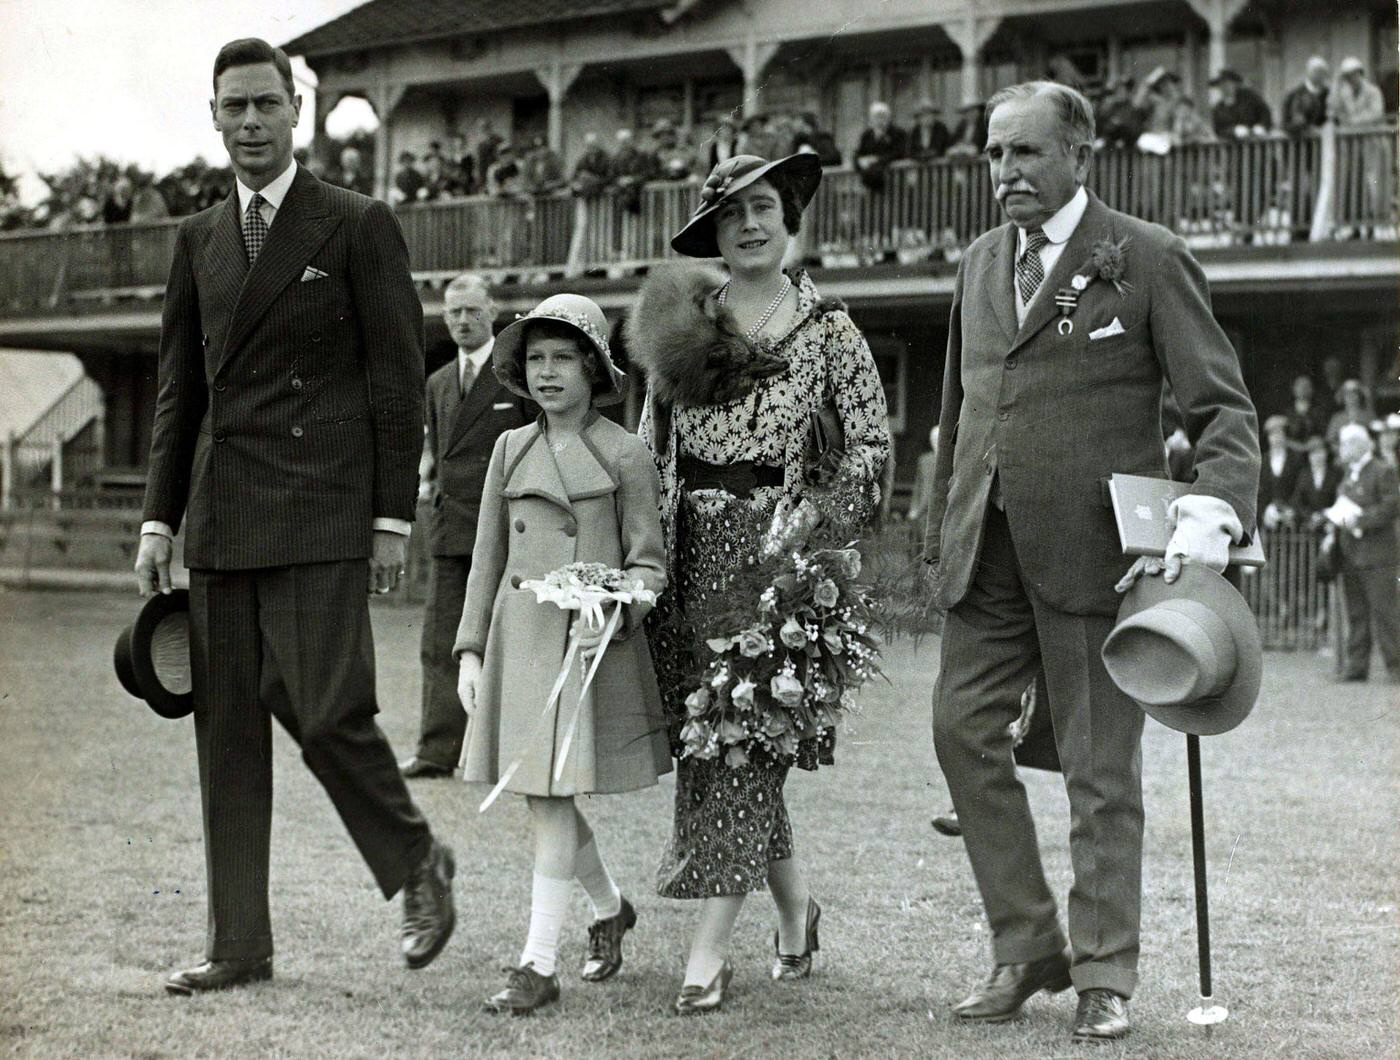 Duke and Duchess of York with Princess Elizabeth at Children's Day, 14th June 1935